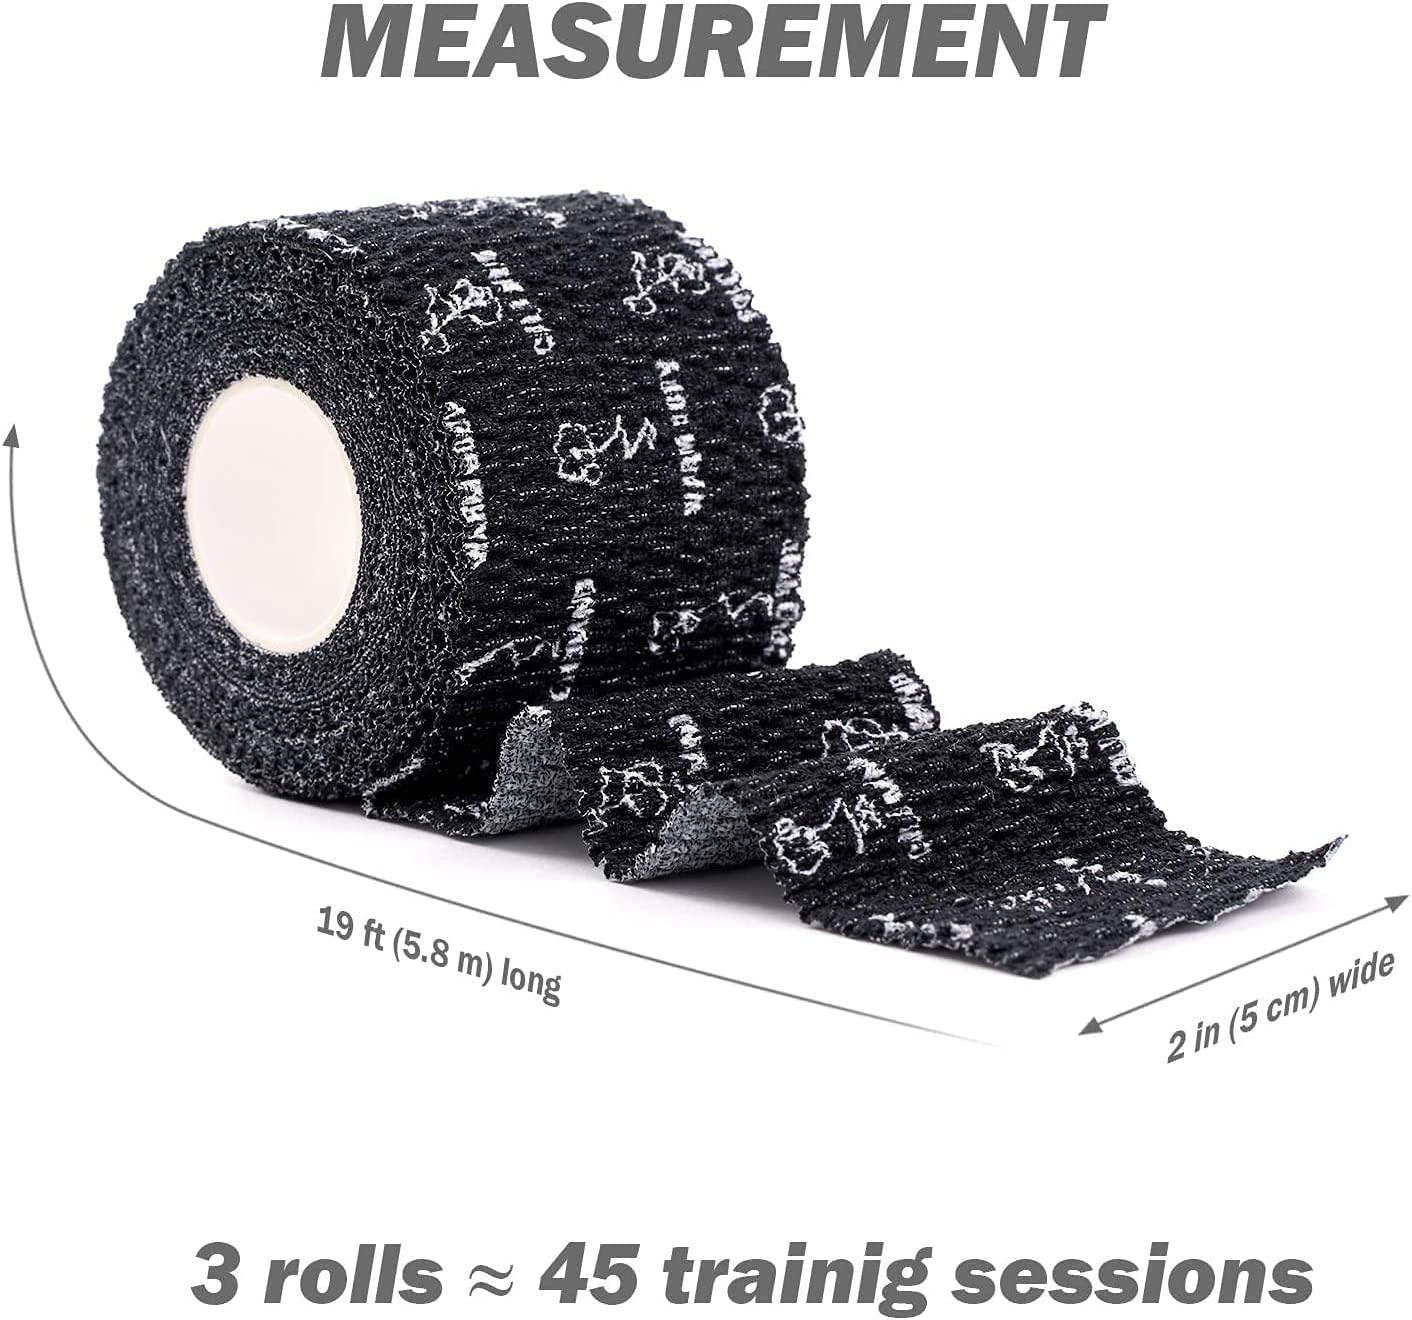  Summum Fit Thumb Tape Weightlifting - Black Hook Grip Tape  Flexible, Durable & Easy to Apply. Sweat Proof Lifting Tape That Stays Put  During Intense Gym Workout. Protect Your Thumbs Now (